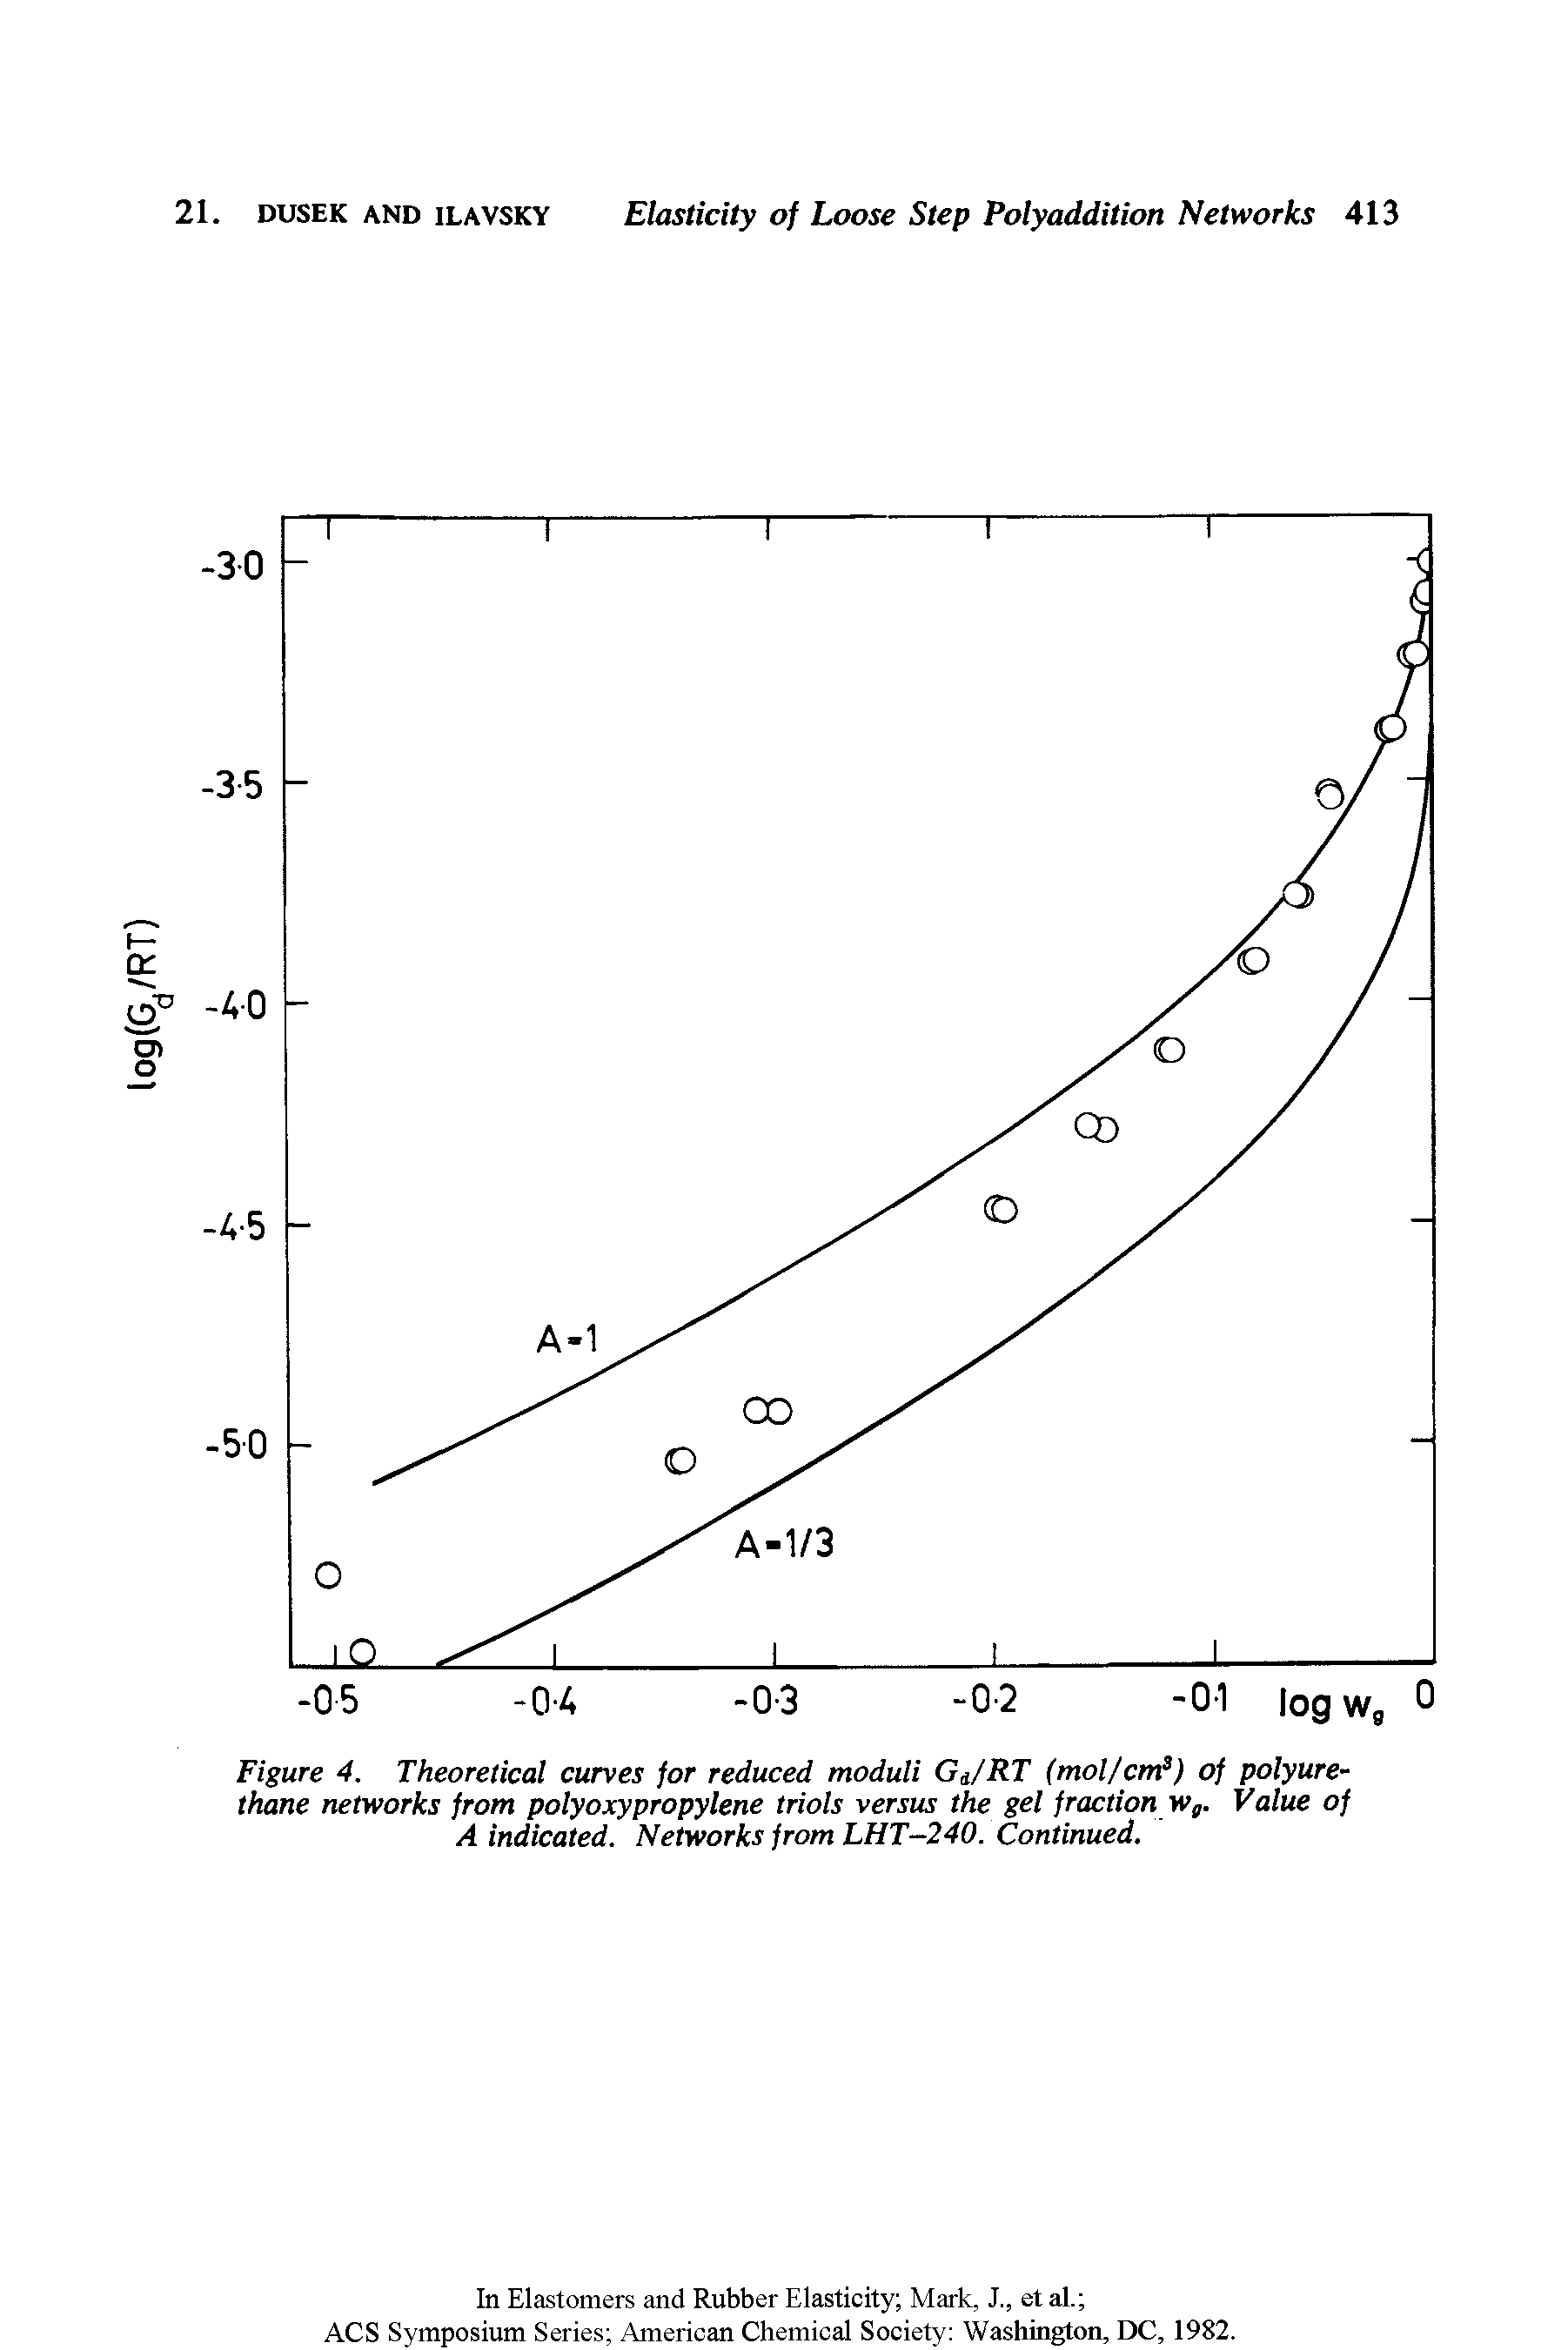 Figure 4. Theoretical curves for reduced moduli Gd/RT (mol/cm3) of polyurethane networks from polyoxypropylene triols versus the gel fraction w . Value of A indicated. Networks from LHT-240. Continued.